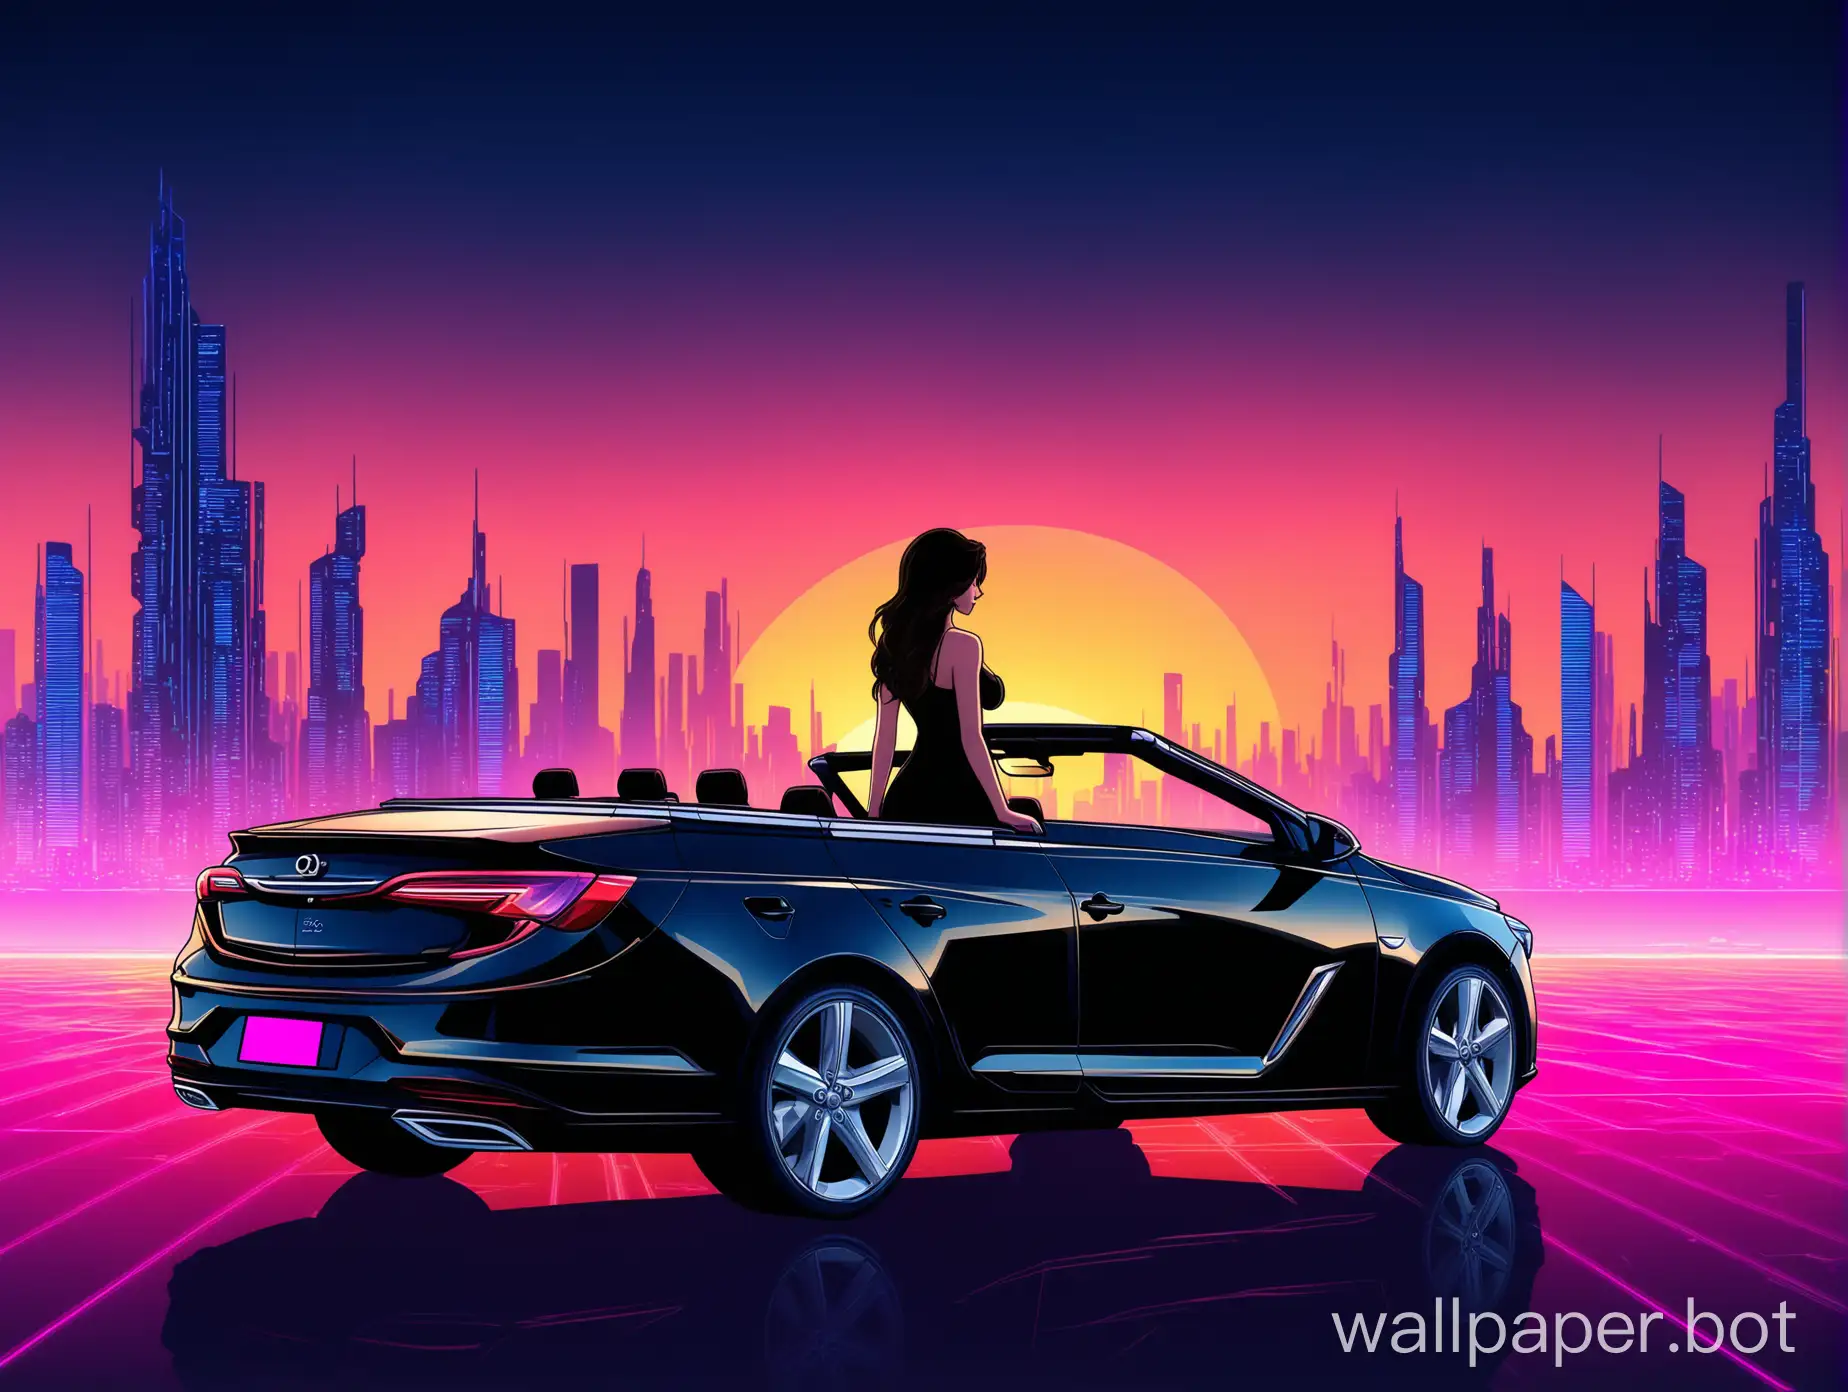 fuller shape woman with long darkbrown hair visible from the back (her face isn't visible), wearing black t-shirt with cleavage, jeans and high heels standing on the right side of a grey opel insignia grandsport convertible car visible from the side. background is a futuristic city at sunset, synthwave style